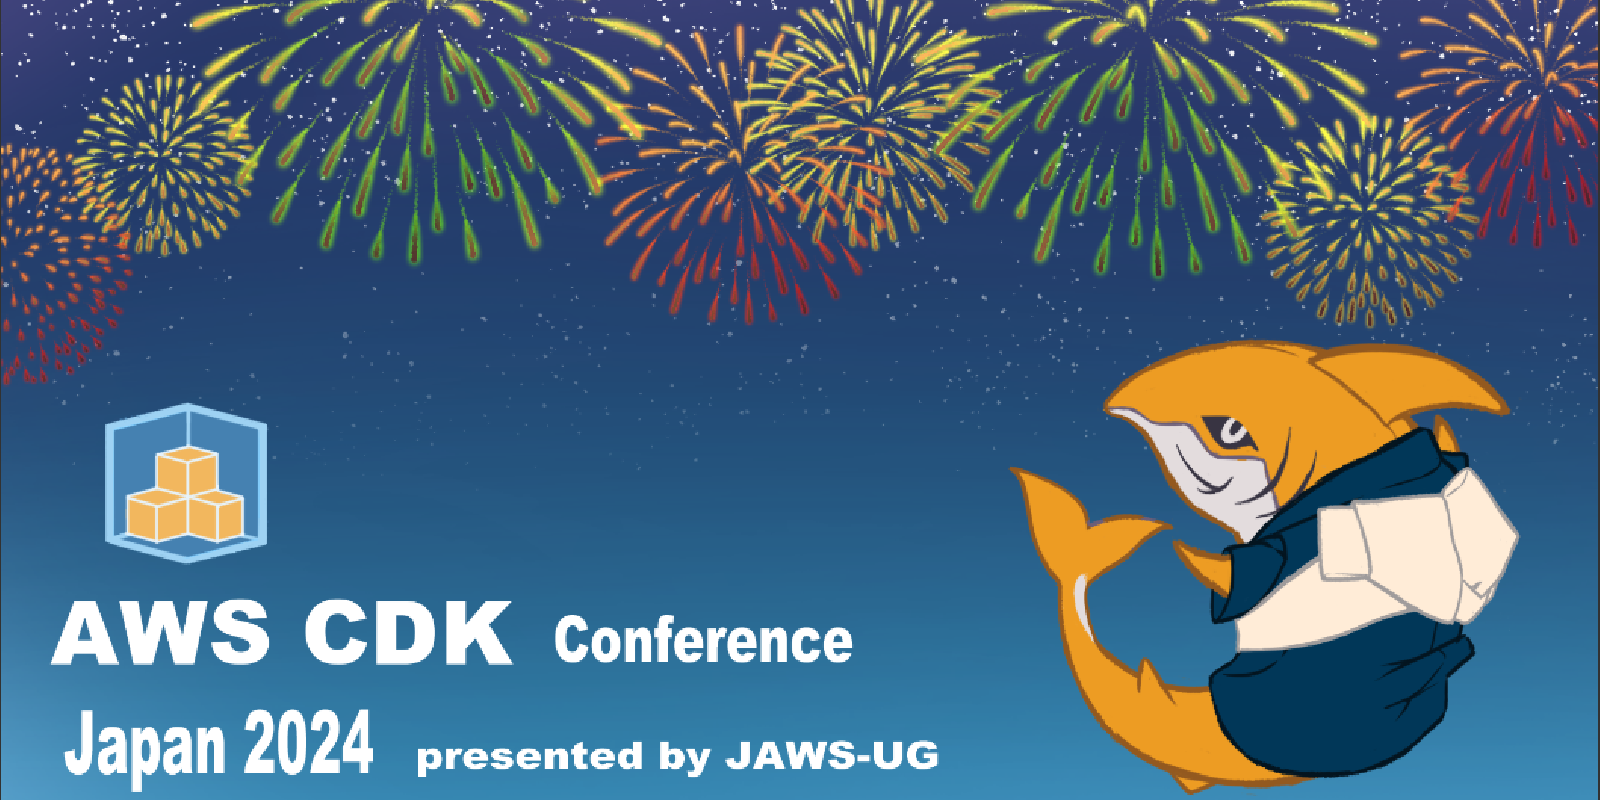 AWS CDK Conference Japan 2024 presented by JAWS-UG